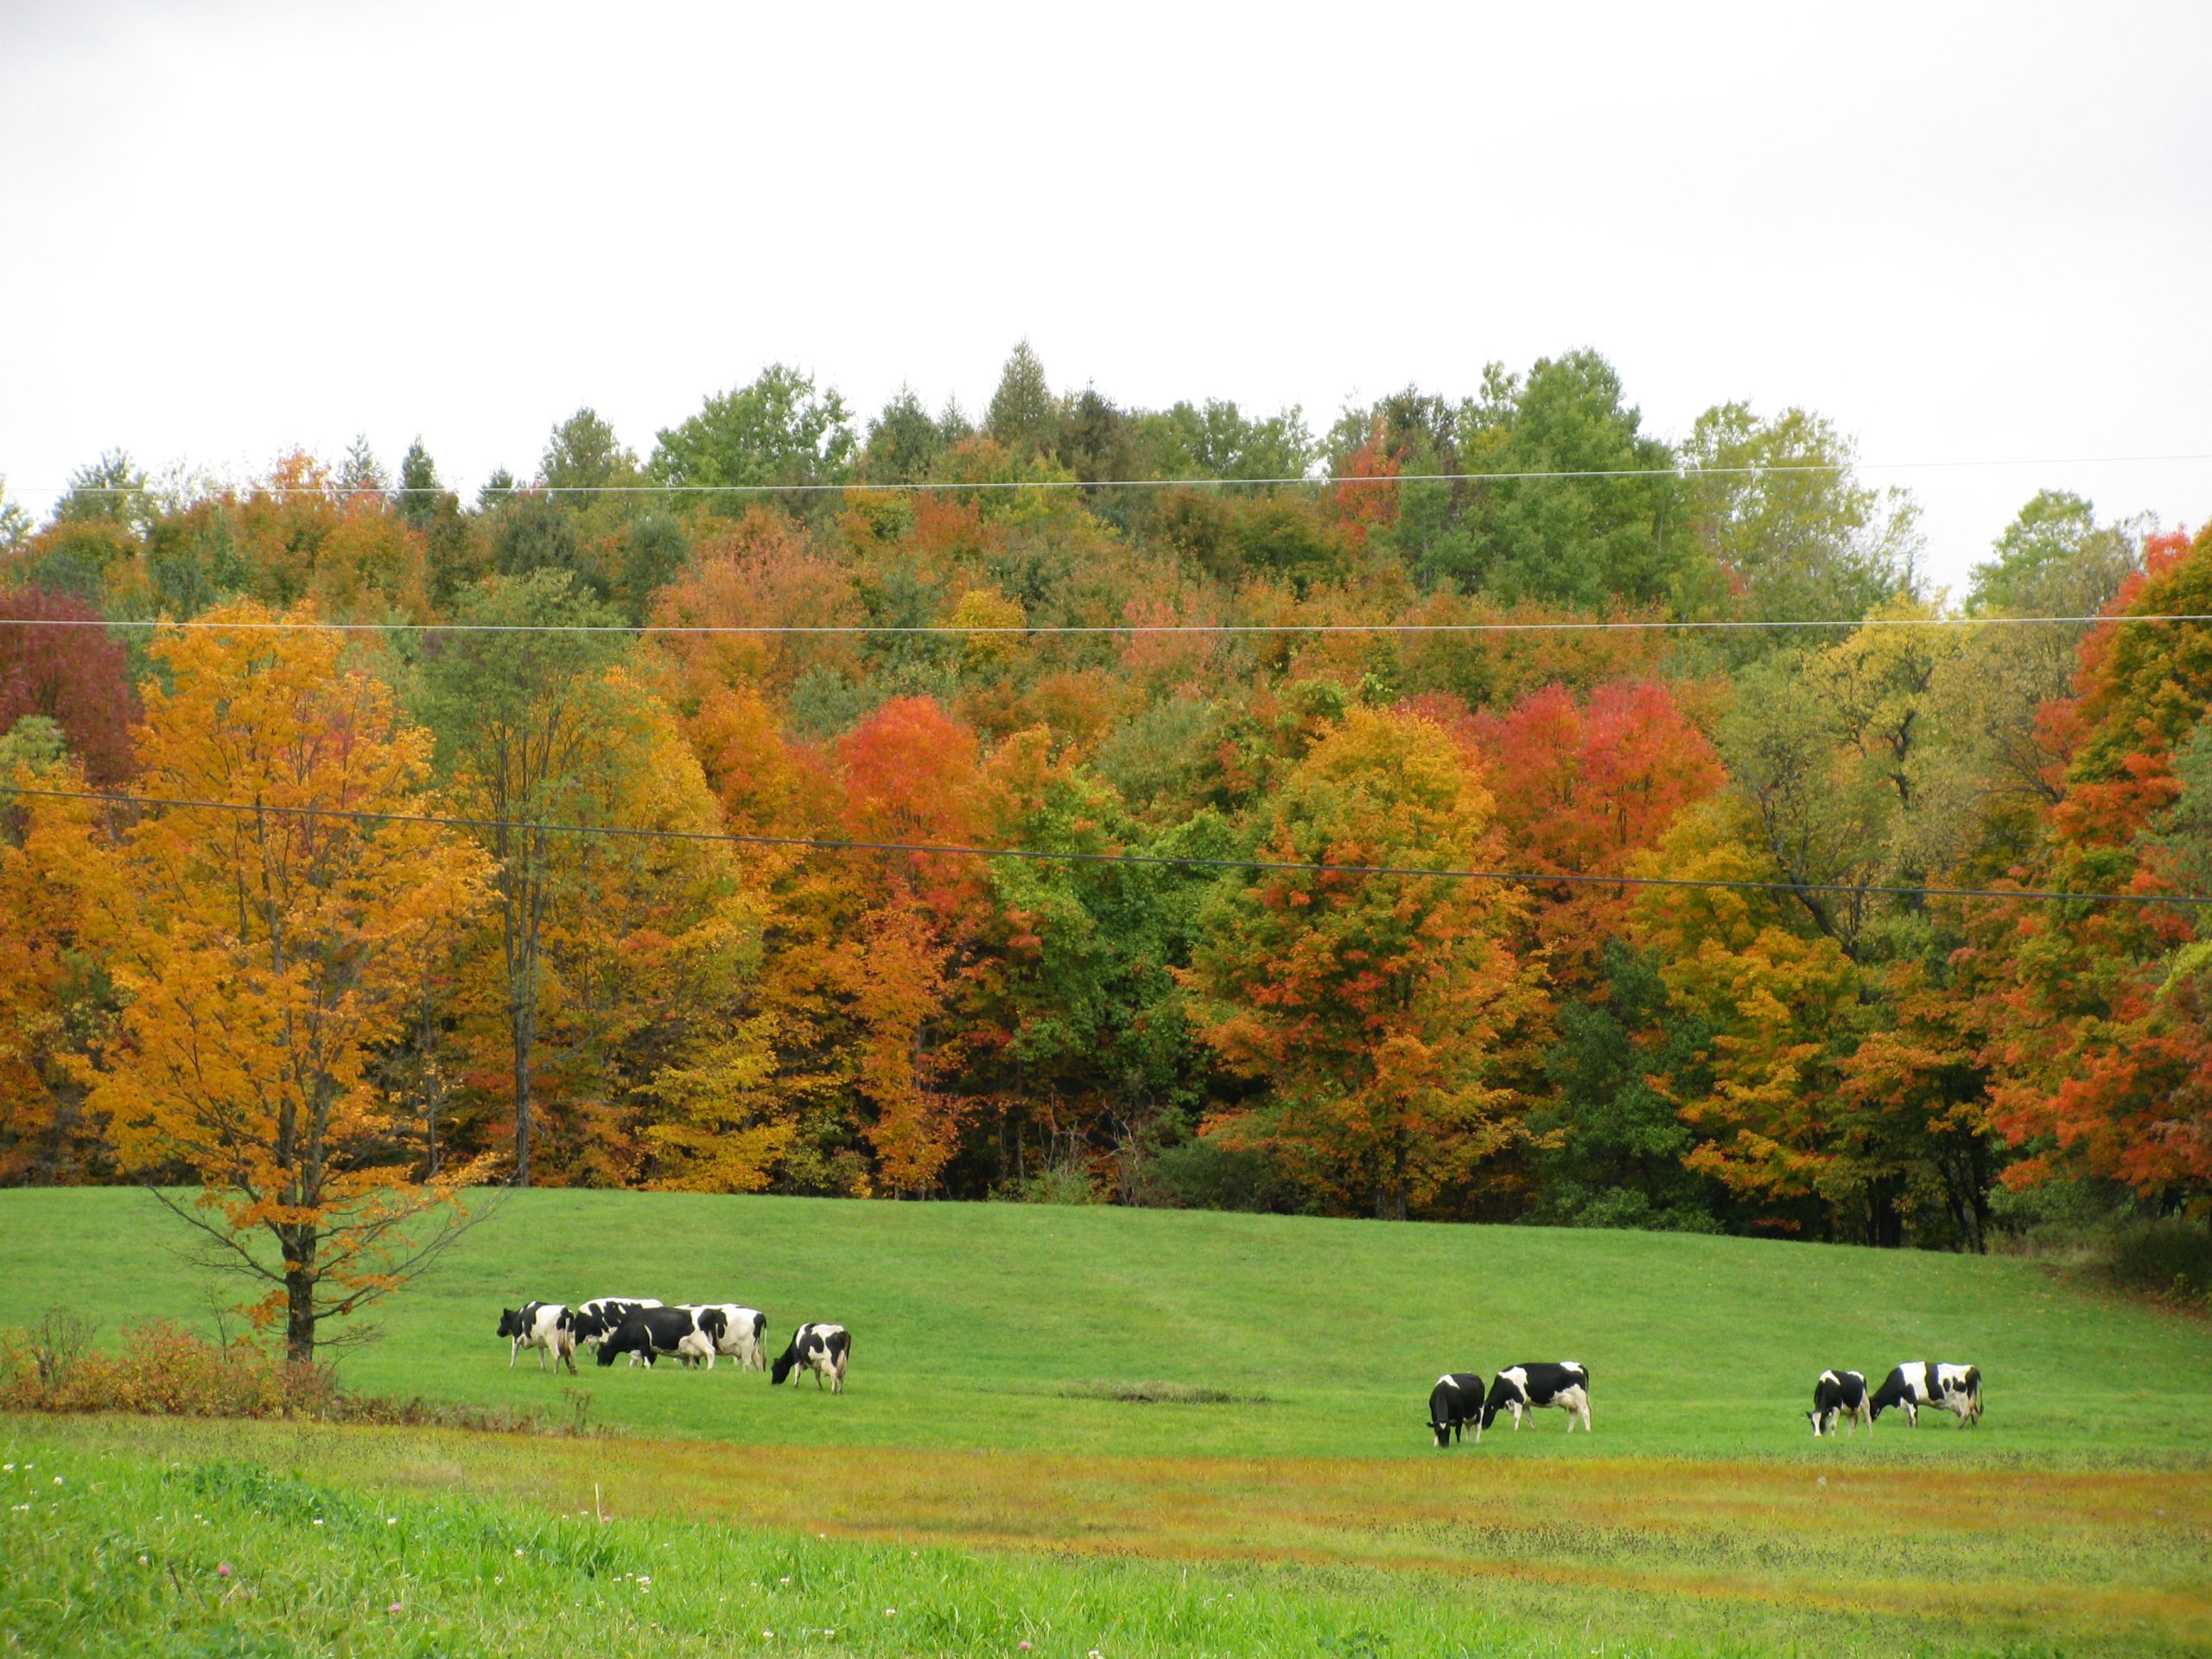 Cows Grazing (user submitted)